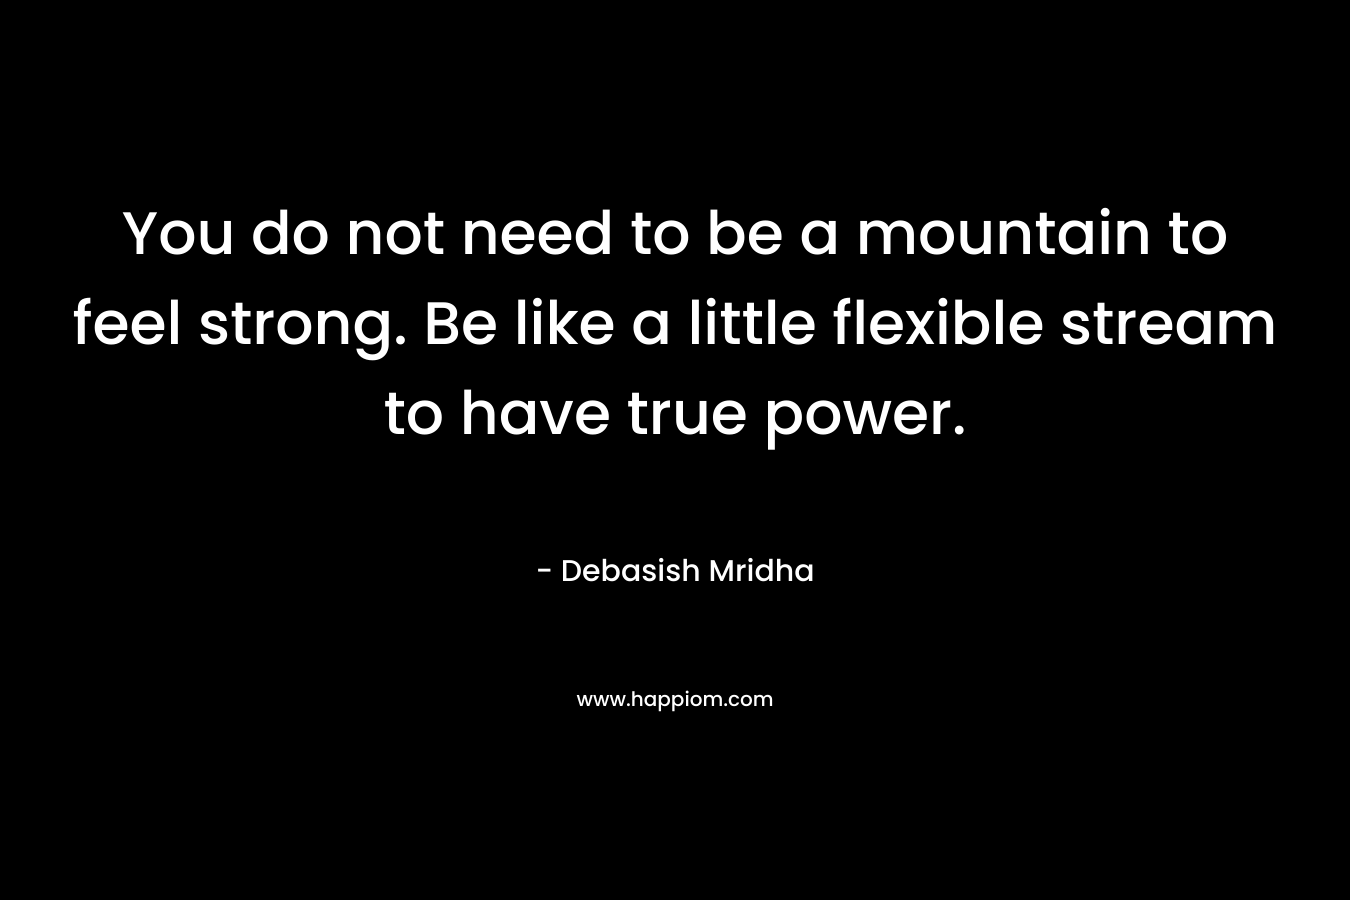 You do not need to be a mountain to feel strong. Be like a little flexible stream to have true power. – Debasish Mridha